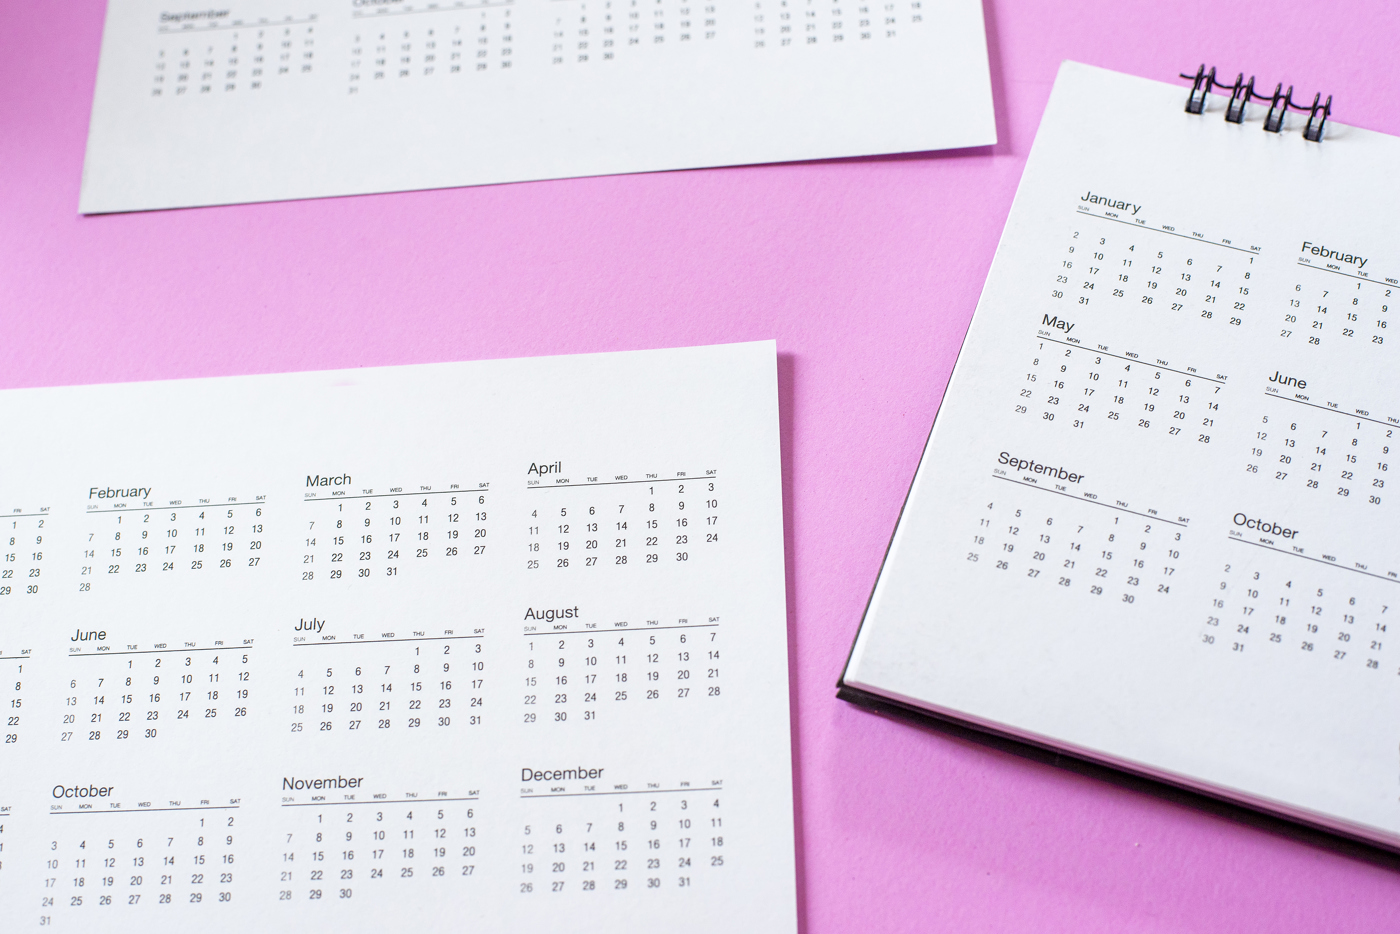 Calendar pages on pink background